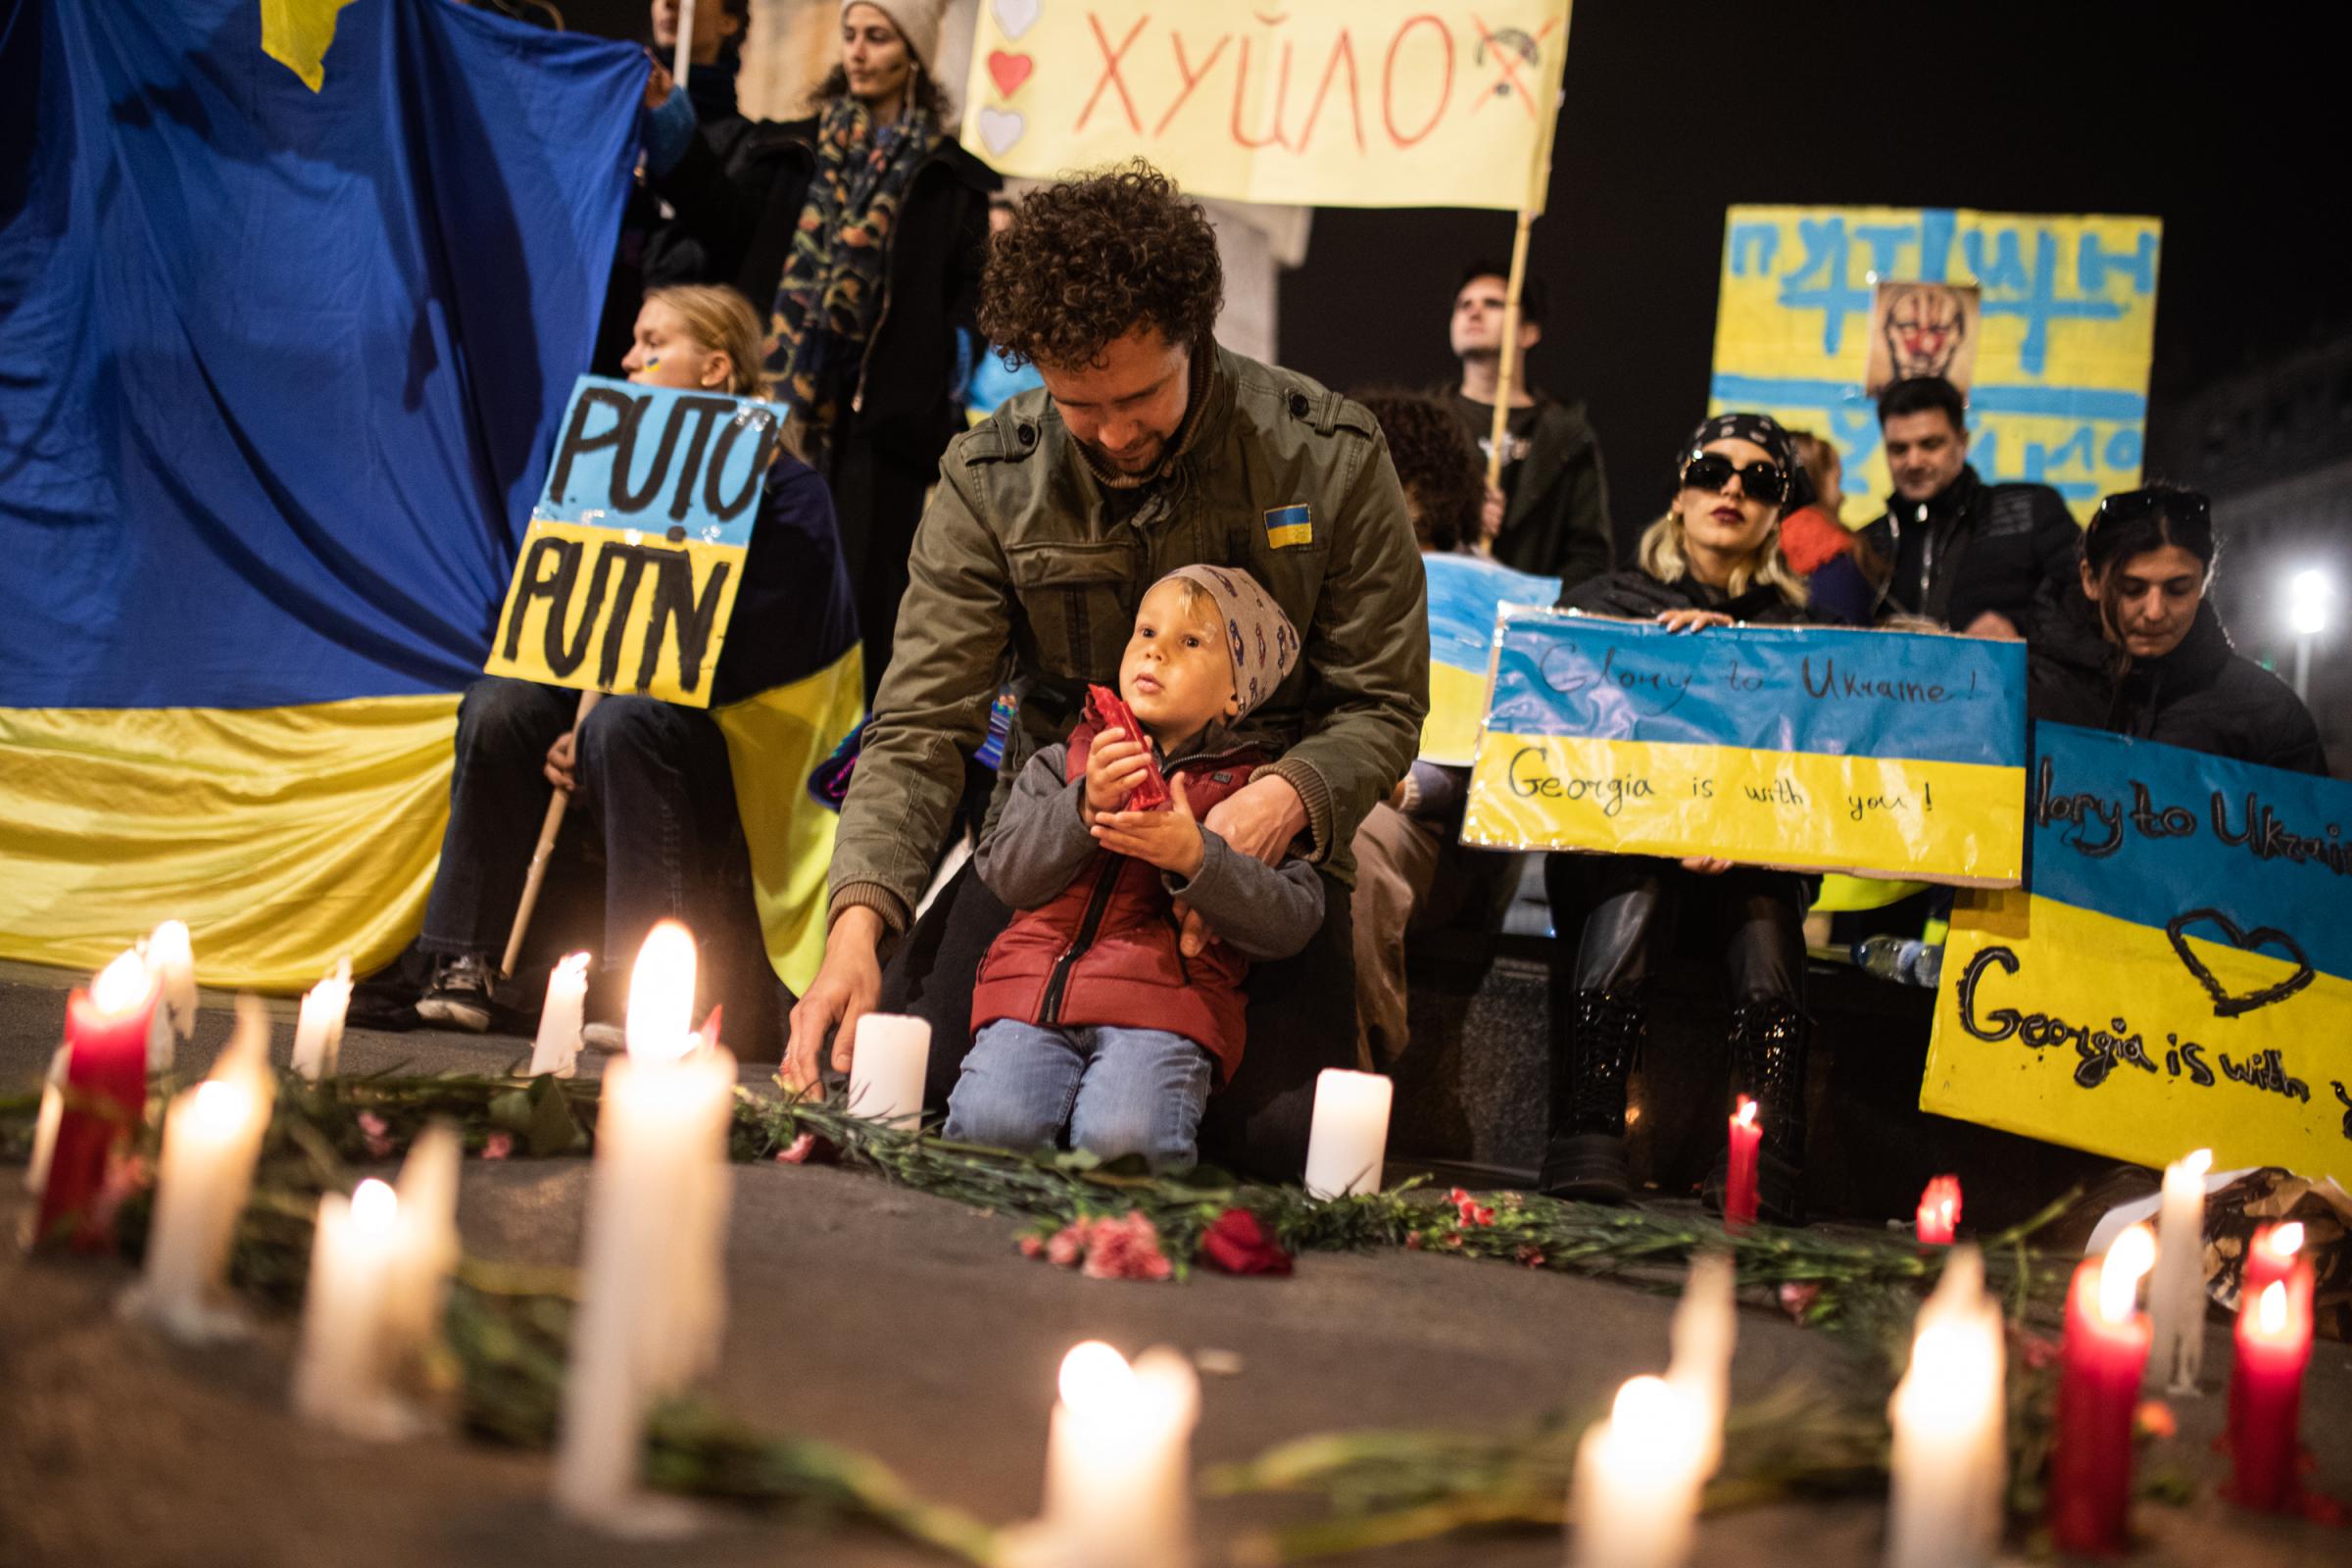 Protestors In Spain Rally For Ukraine After Russian Invasion - BARCELONA, SPAIN - FEBRUARY 26: People take part in a...